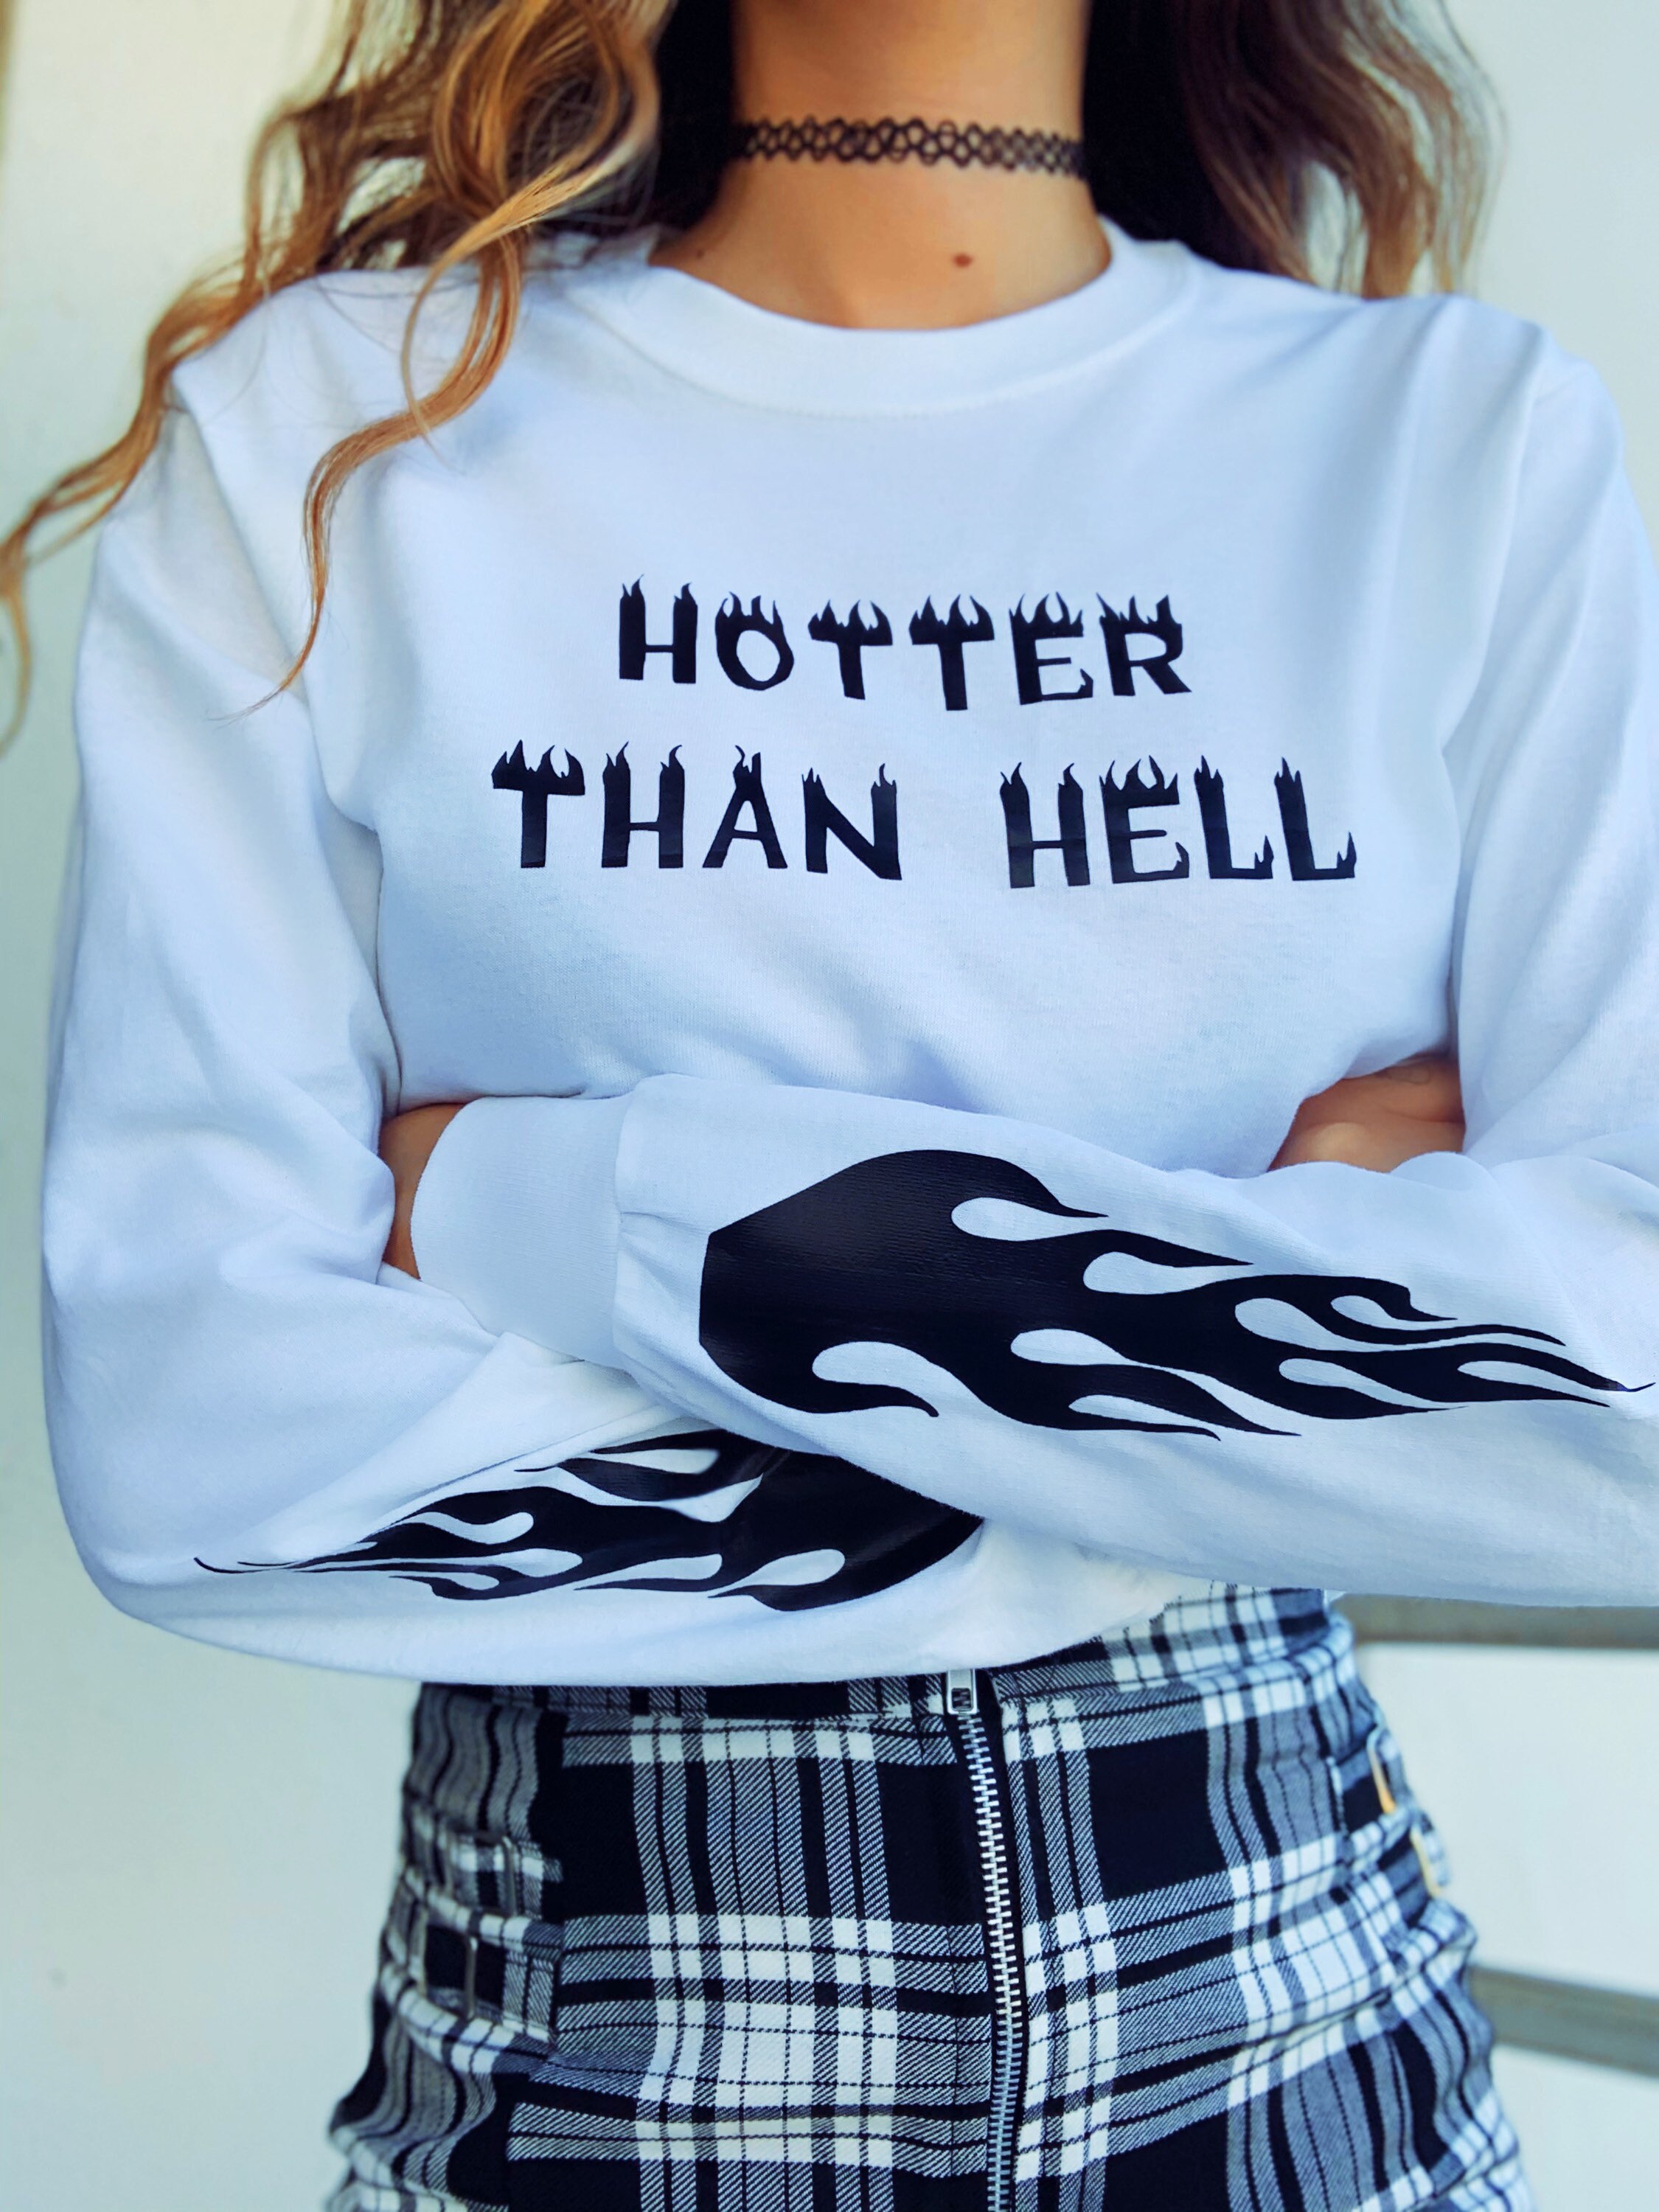 Hotter Than Hell - Etsy